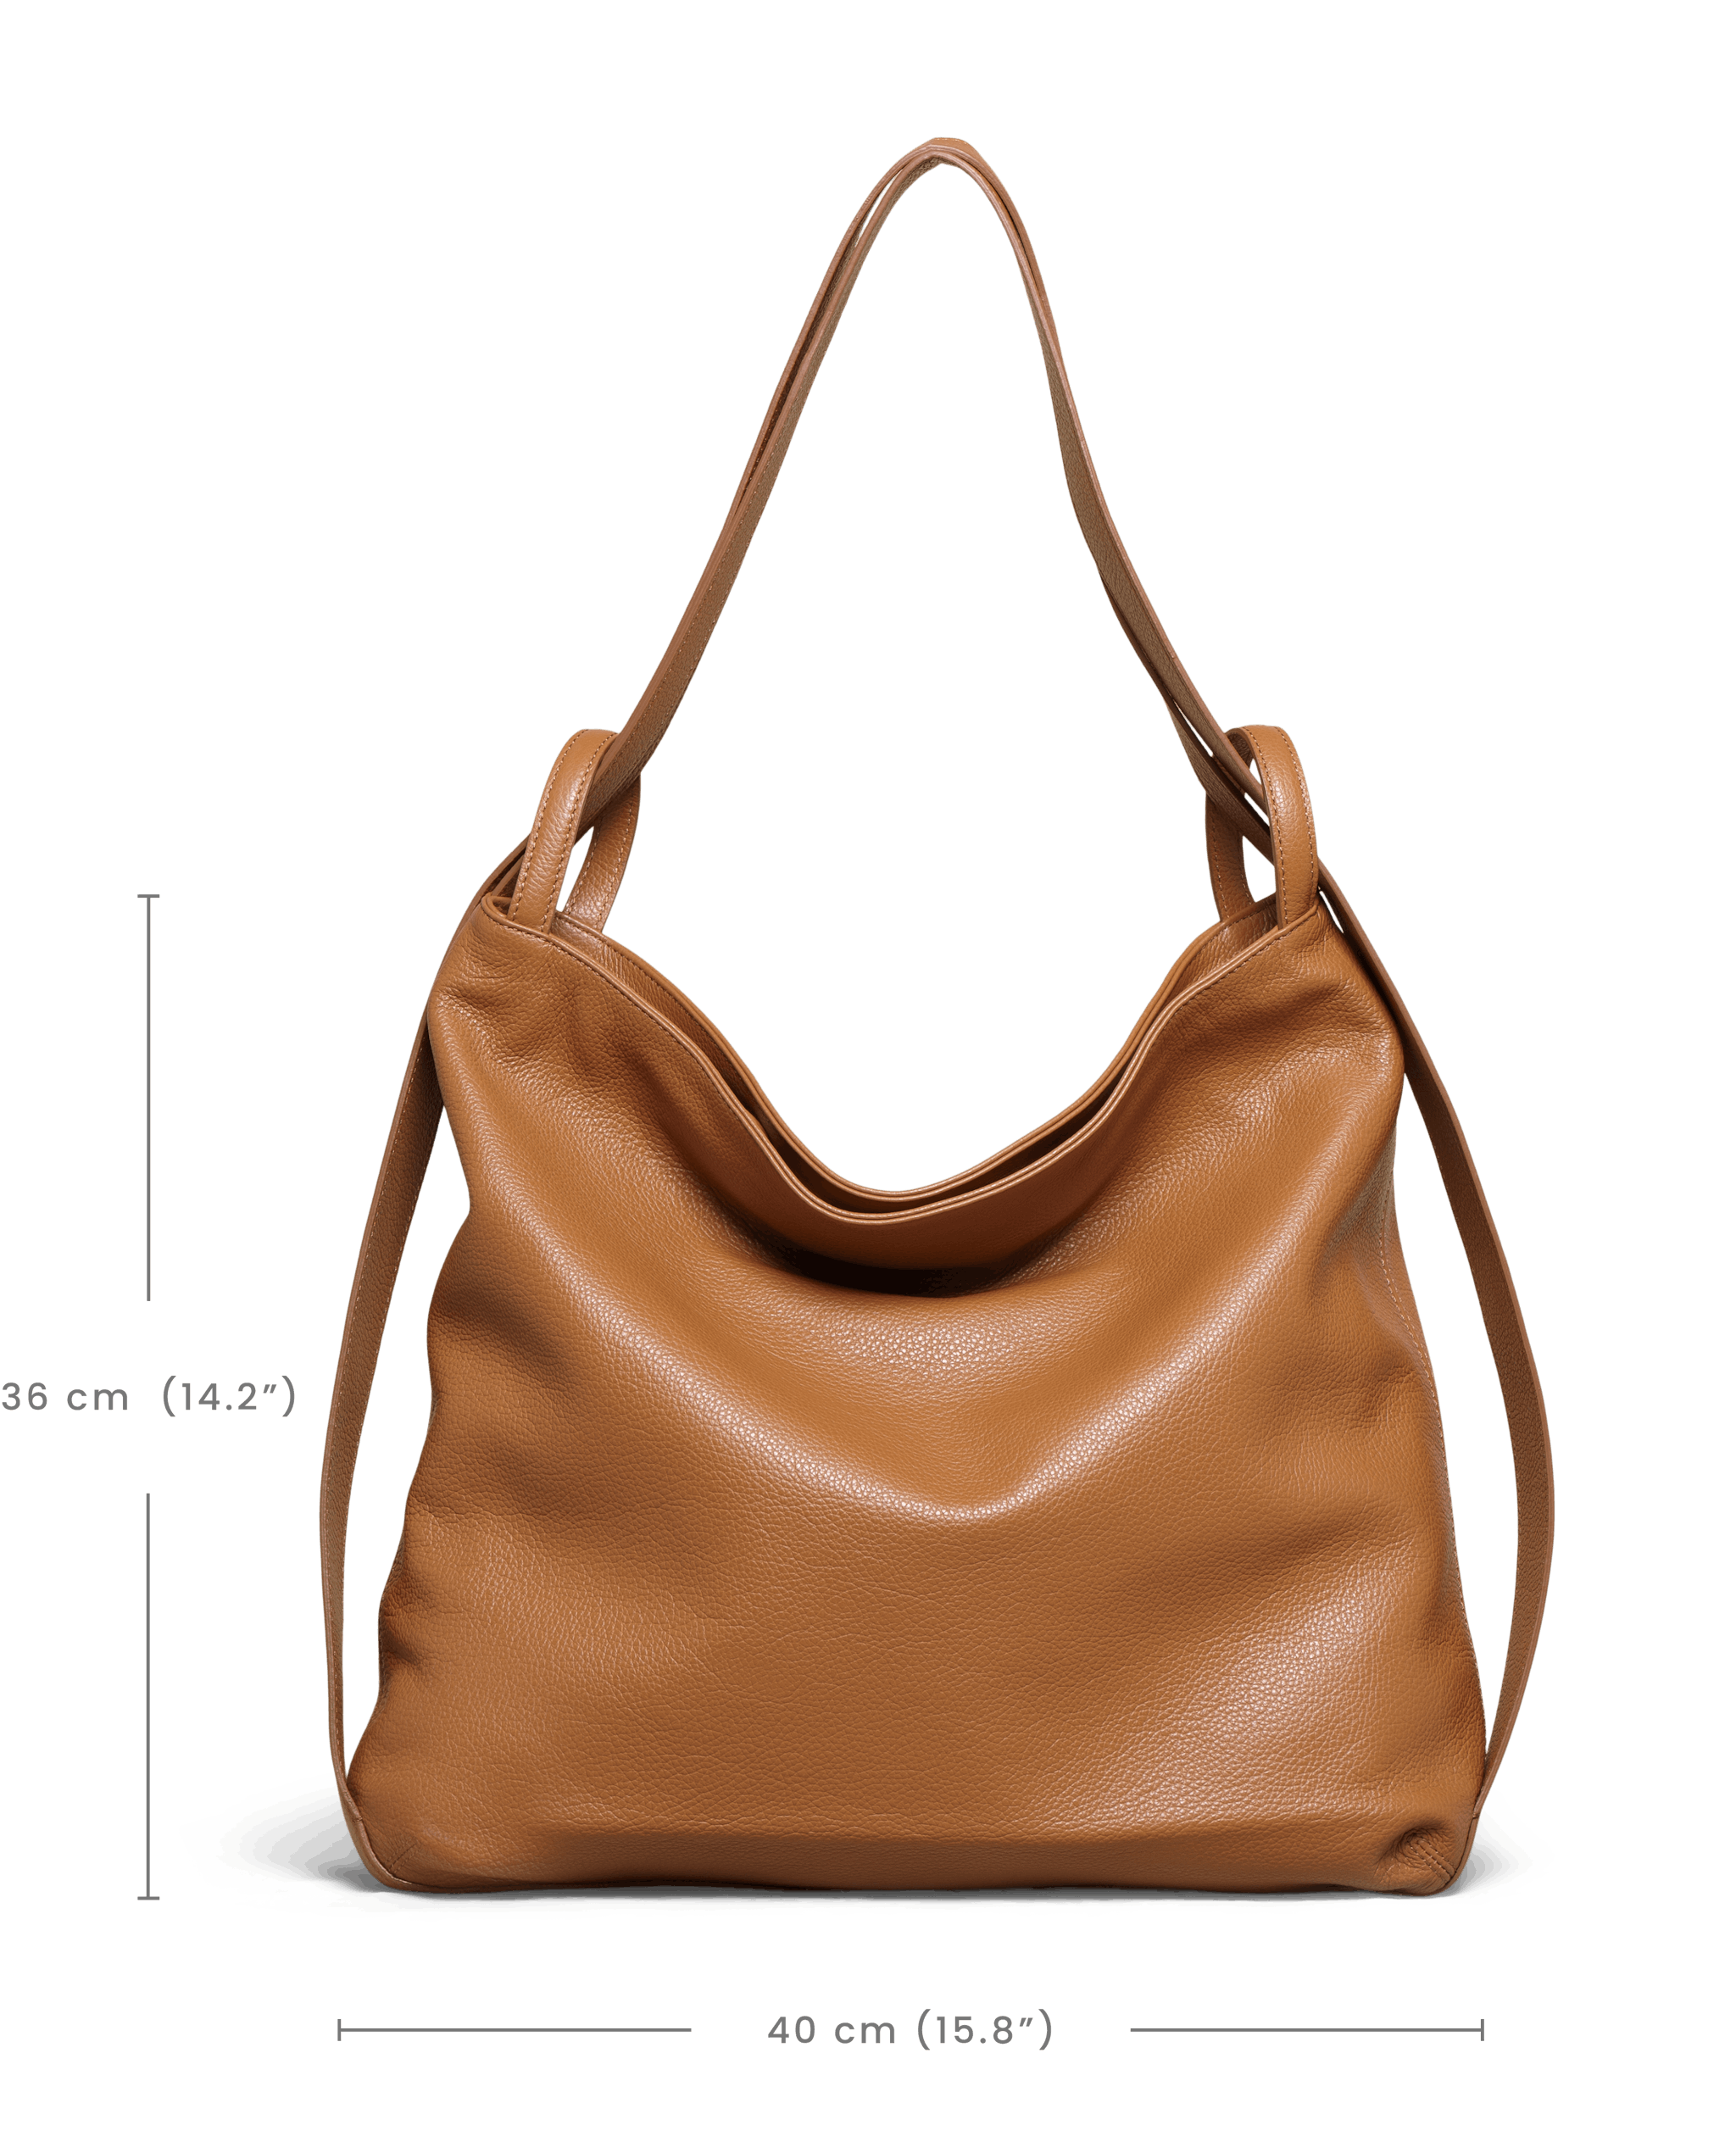 MARTA - Women's bag convertible into a backpack